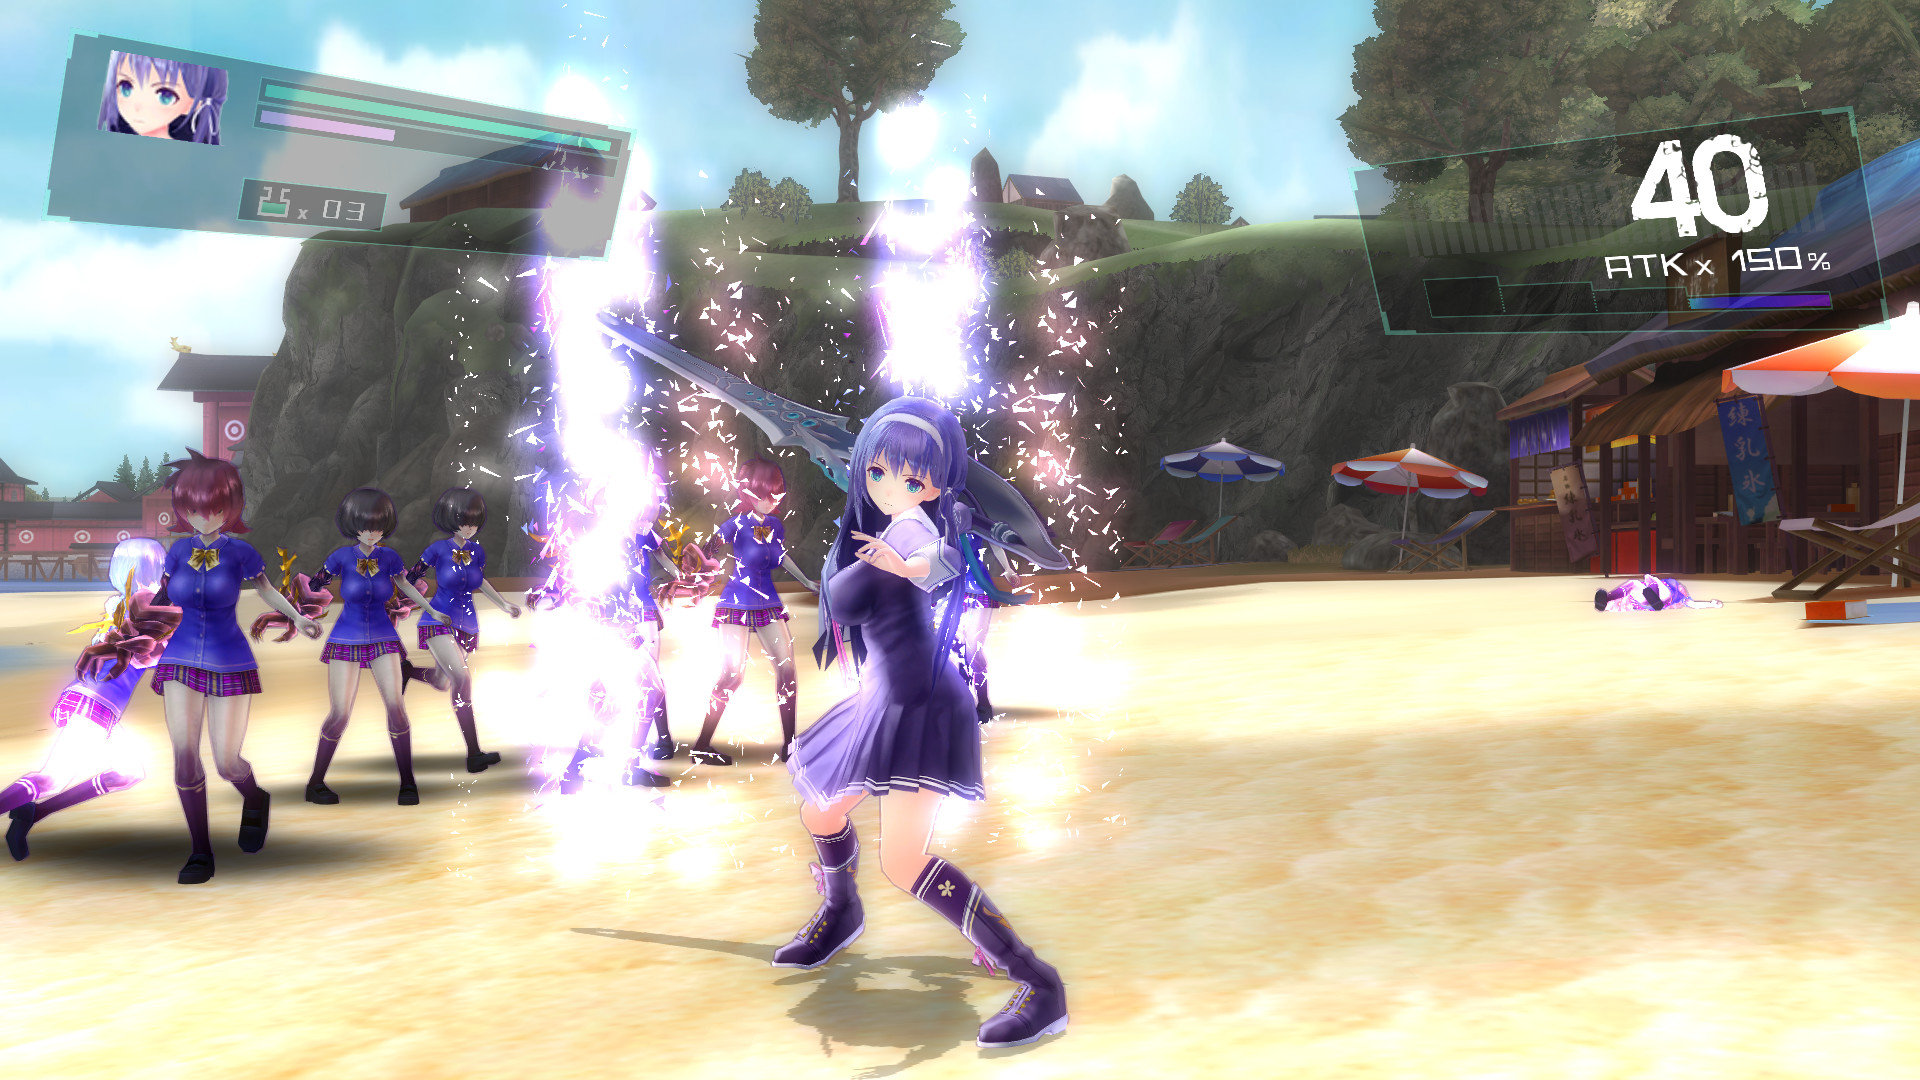 Valkyrie Drive game coming to Steam.